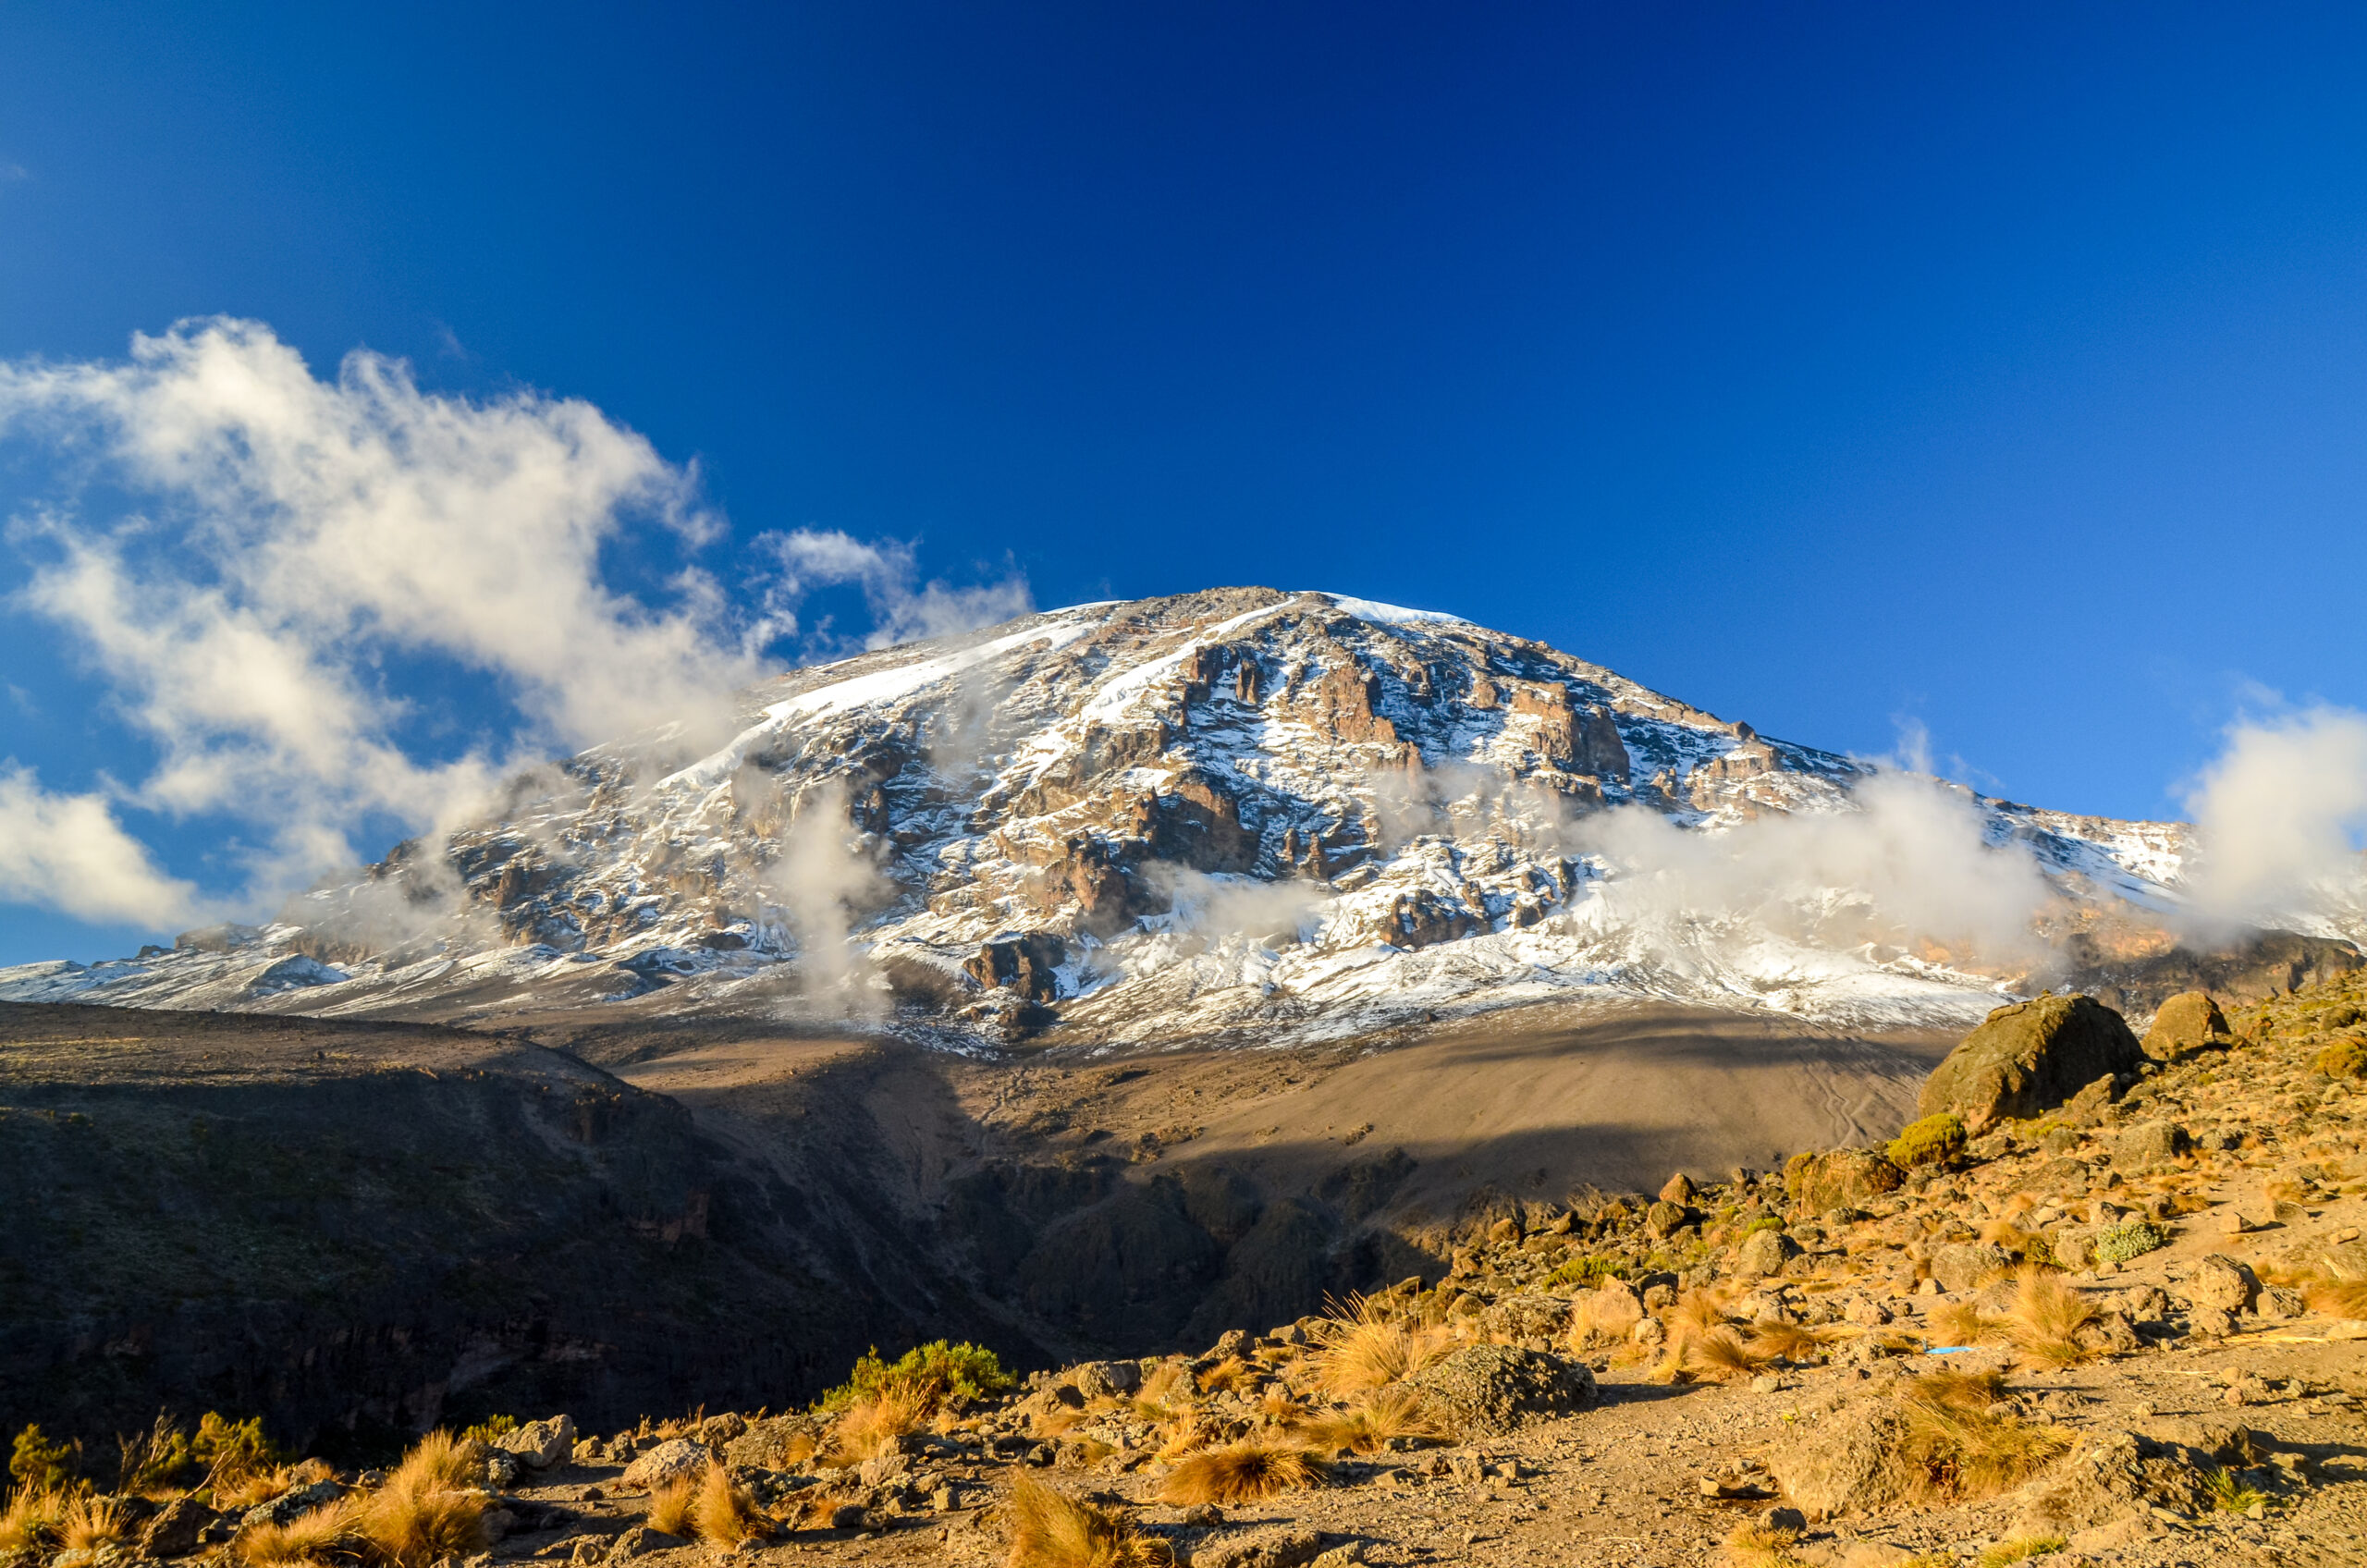 Start your breathtaking Kilimanjaro adventures with Ethiopian Airlines